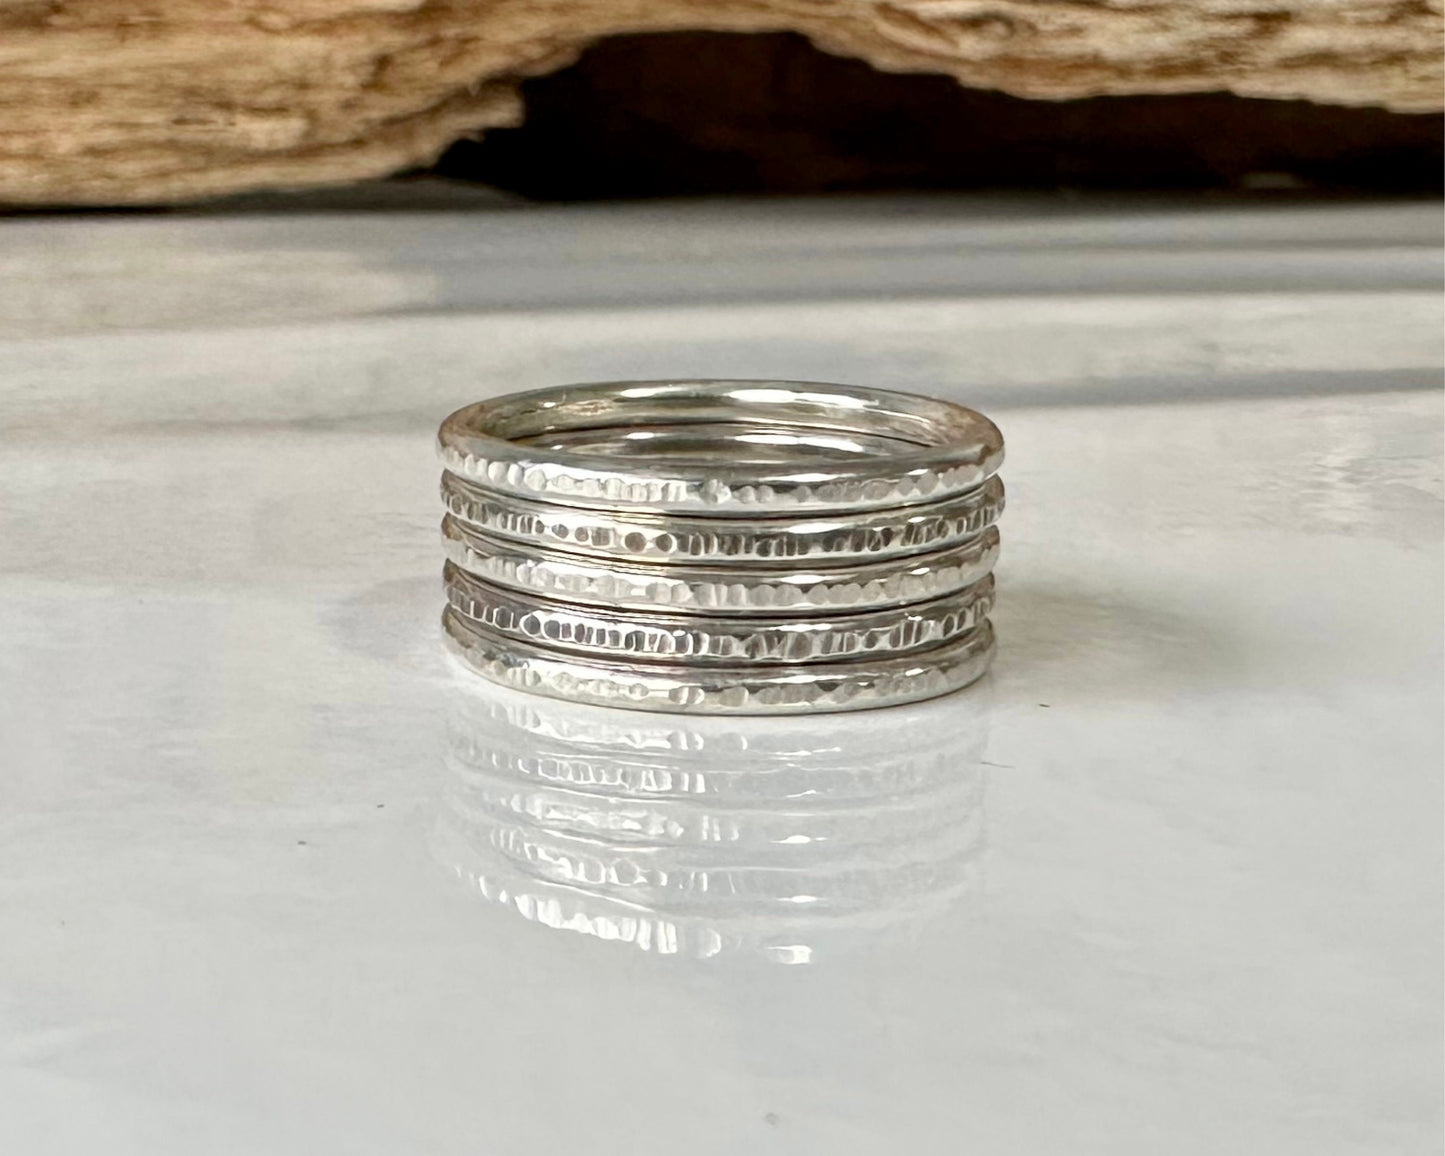 Set of three Oxodised 1.8mm 925 Sterling Silver Stacking Rings, Ripple Hammered Effect Minimalist Ring Band, Handmade Rustic Stacking Ring